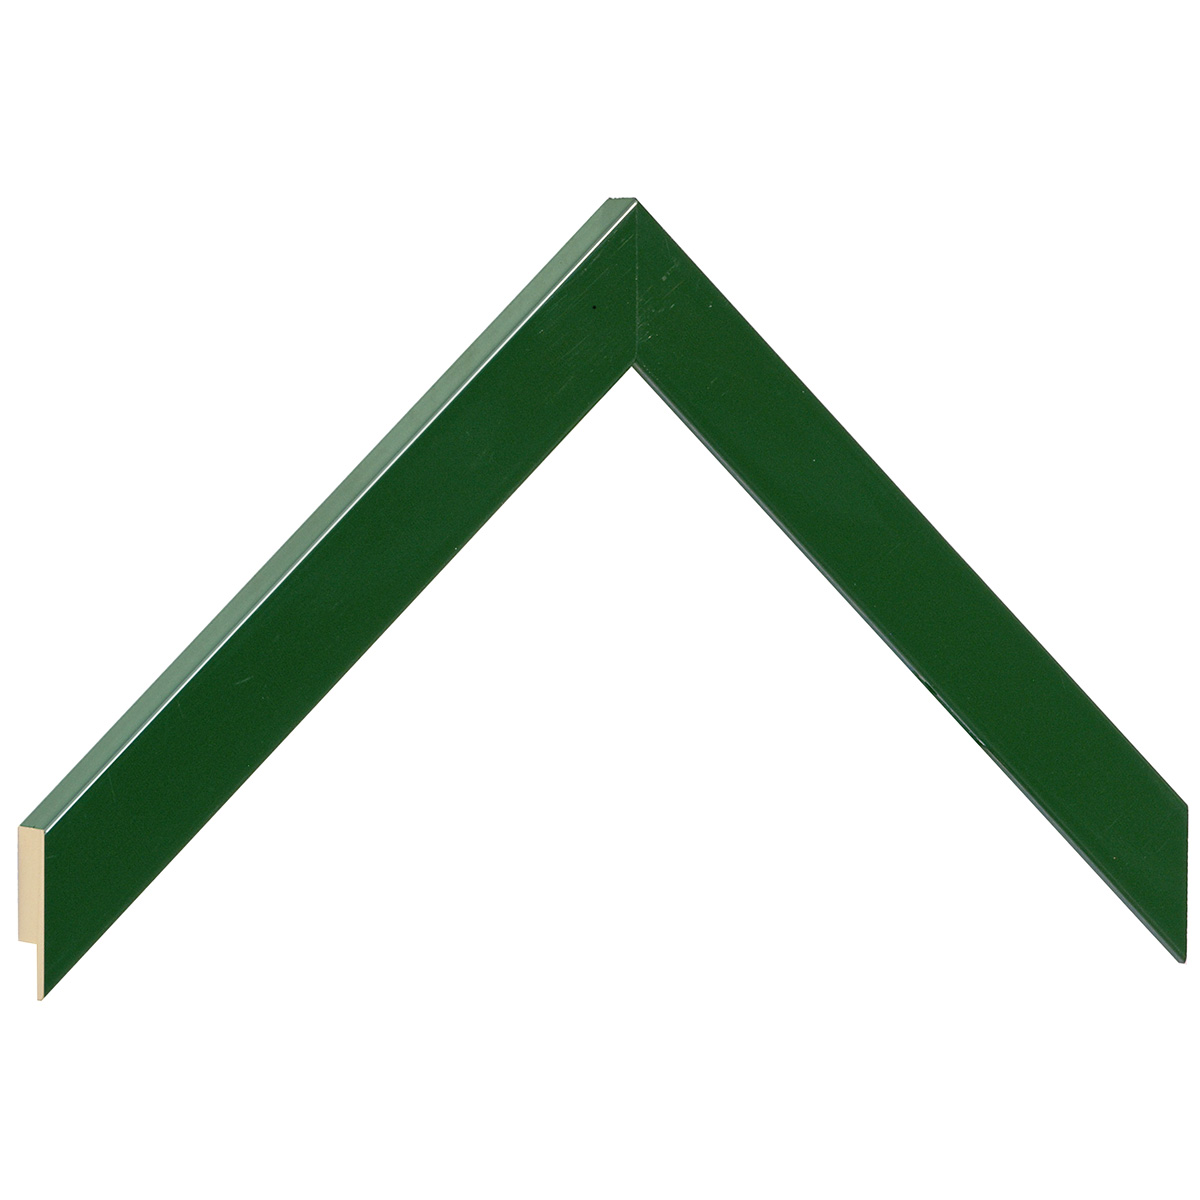 Moulding ayous - width 20mm height 14 - Glossy green - Sample